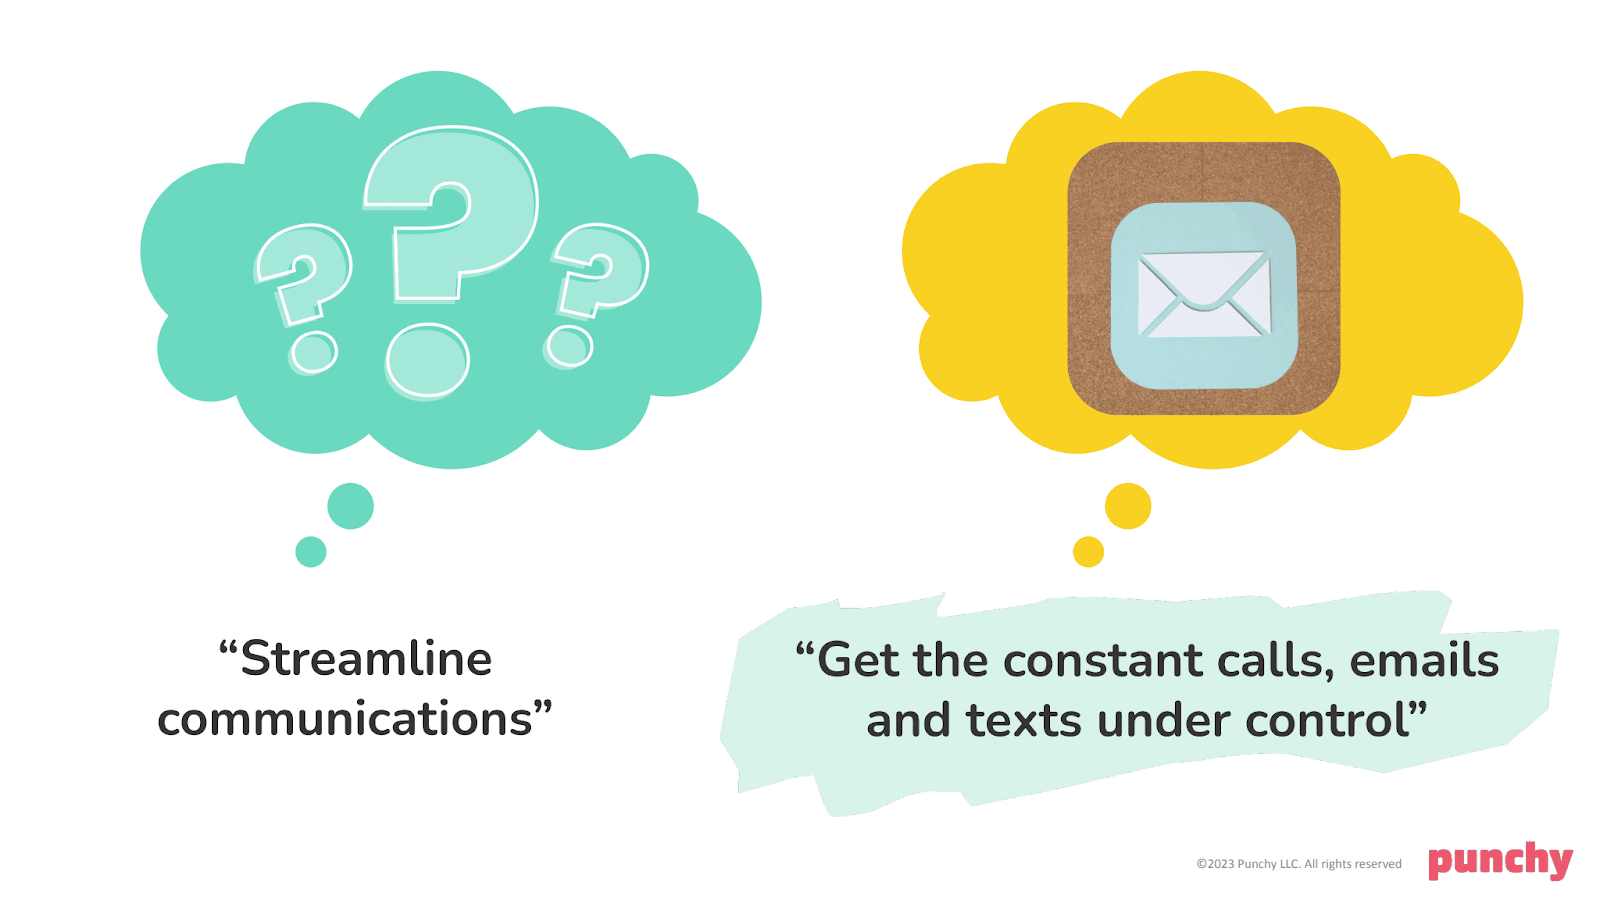 "Streamline communications" vs.  “Get the constant calls, emails, and texts under control”